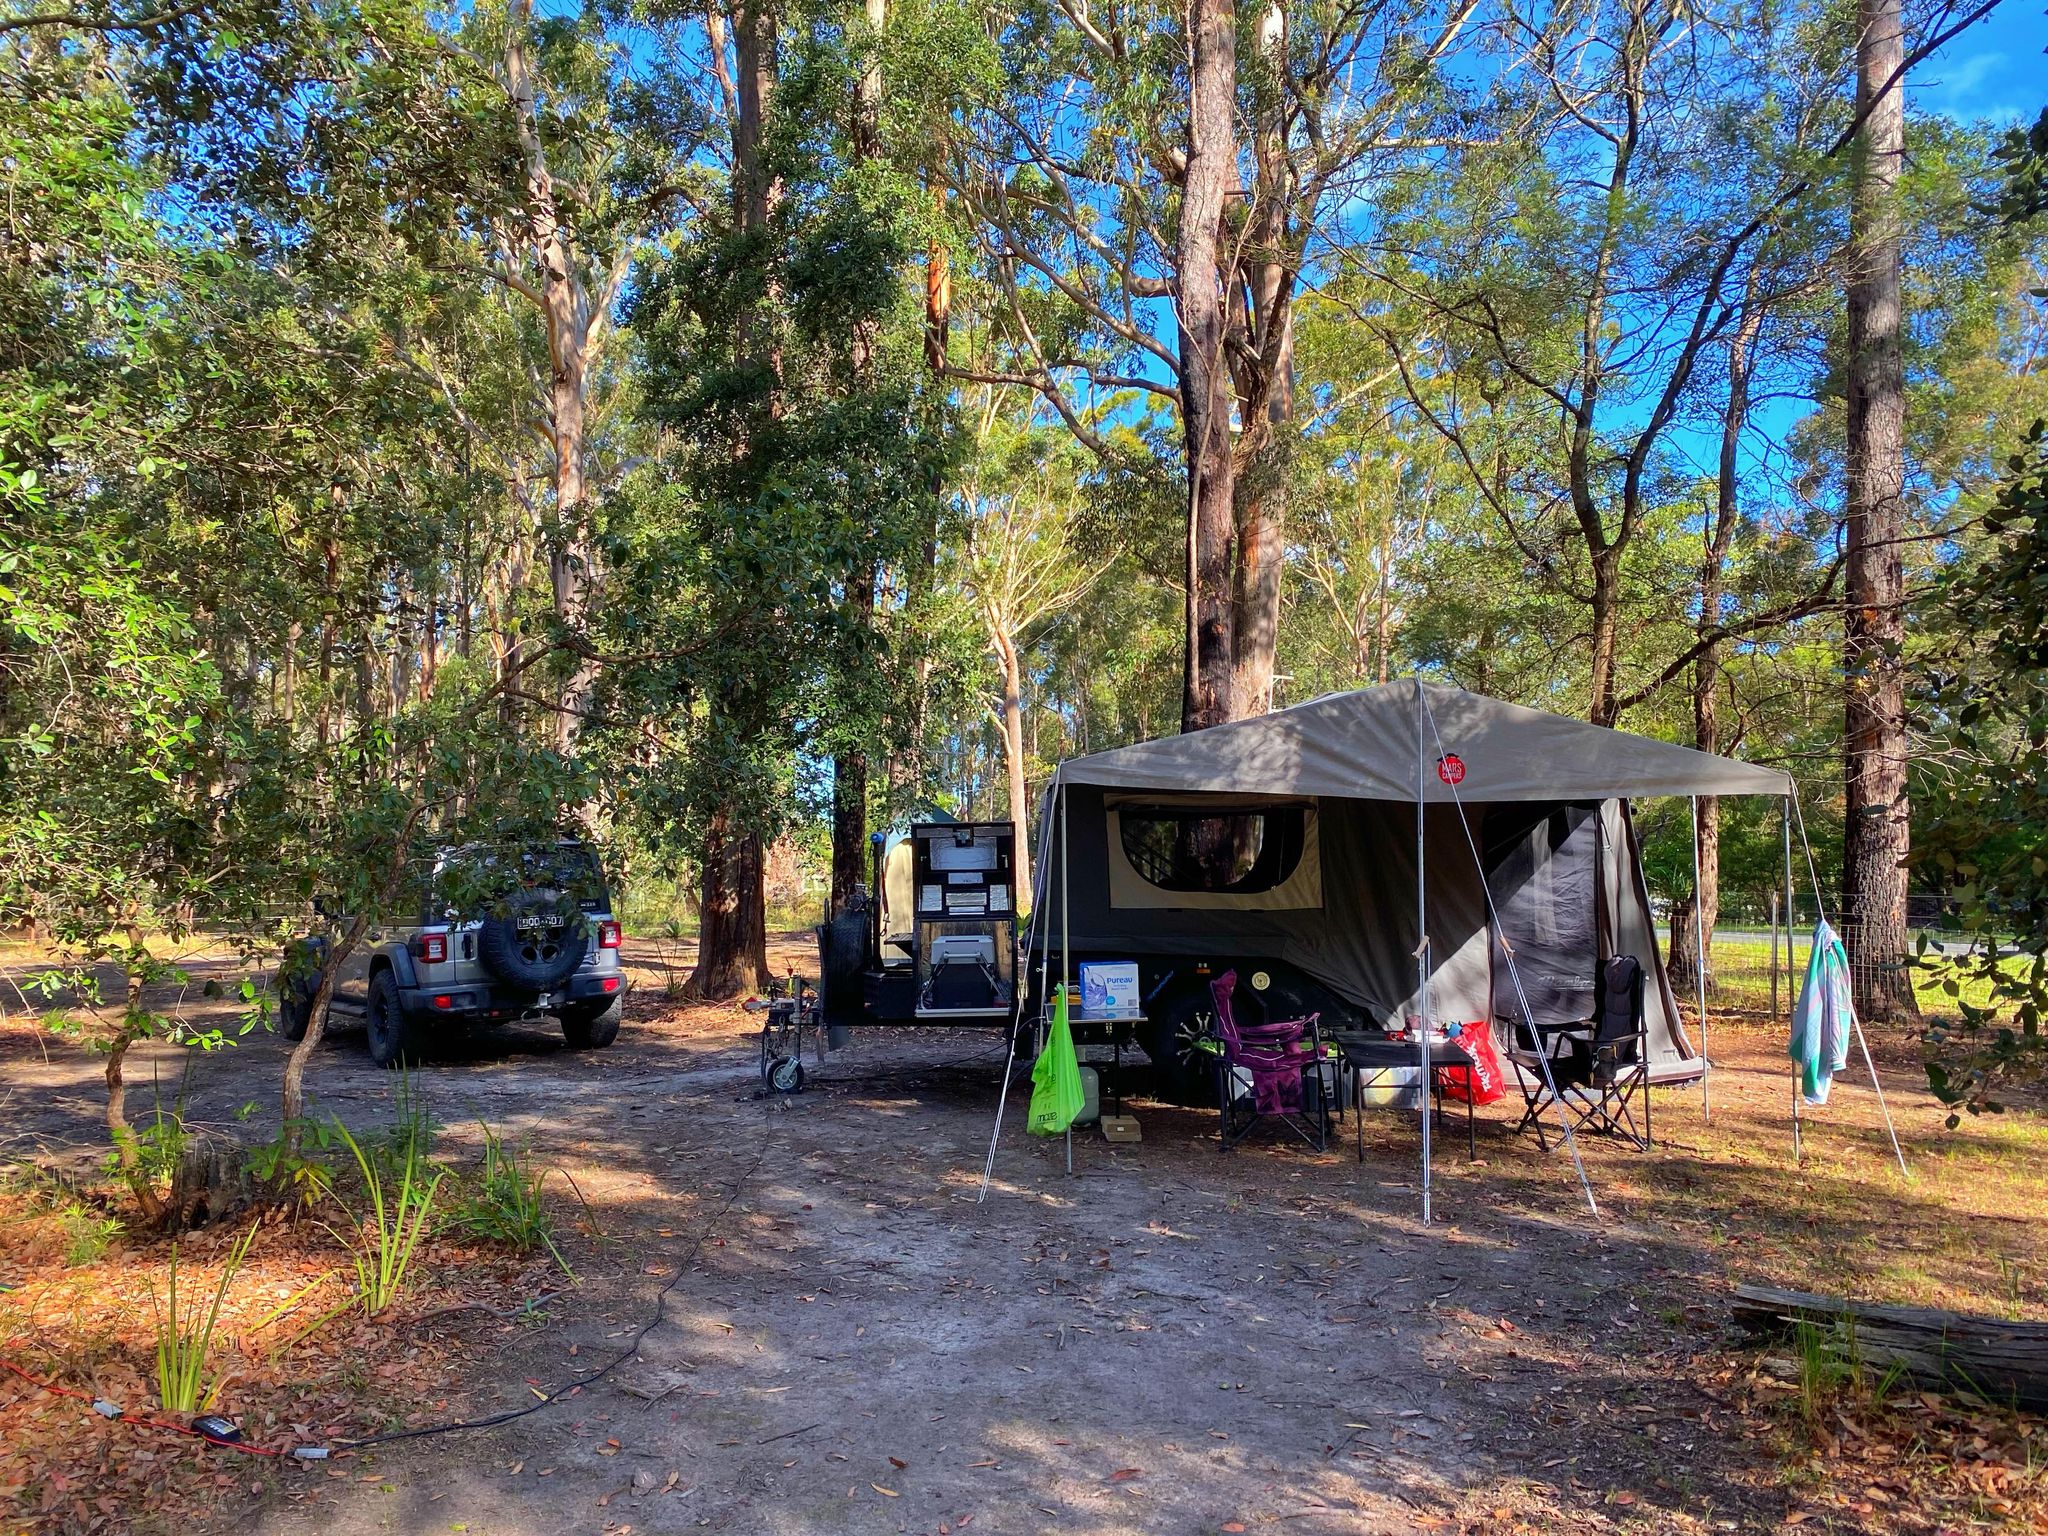 Unlike "official" camp sites around Jervis bay where the next camper is 3m away, we were atleast 25m away from the nearest camp. Plenty of space on site. The trees are magnificent, we loved it.